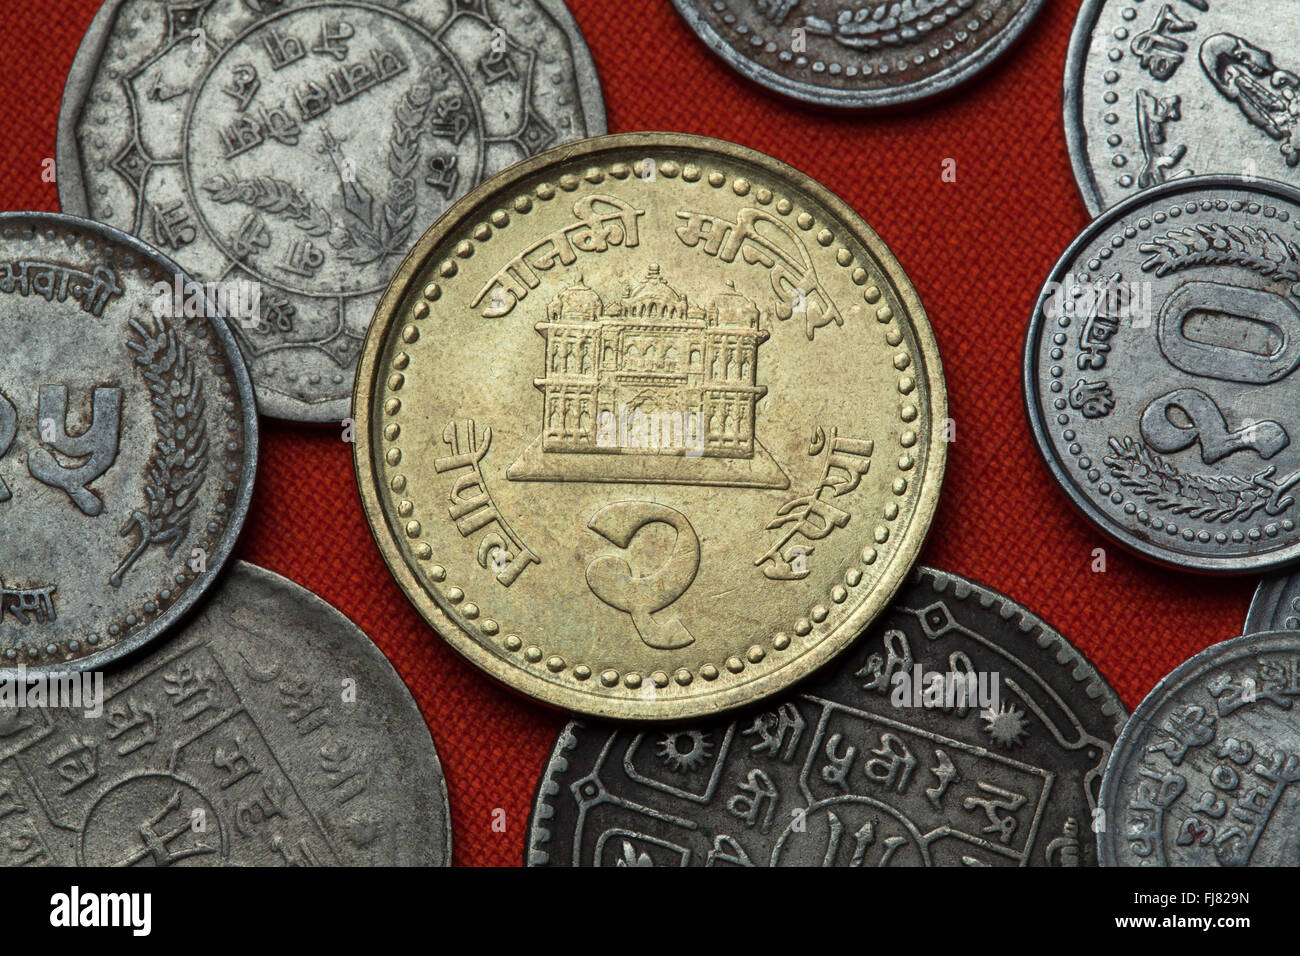 Coins of Nepal. Janaki Mandir Temple in Janakpur, Nepal depicted in the Nepalese two rupee coin. Stock Photo